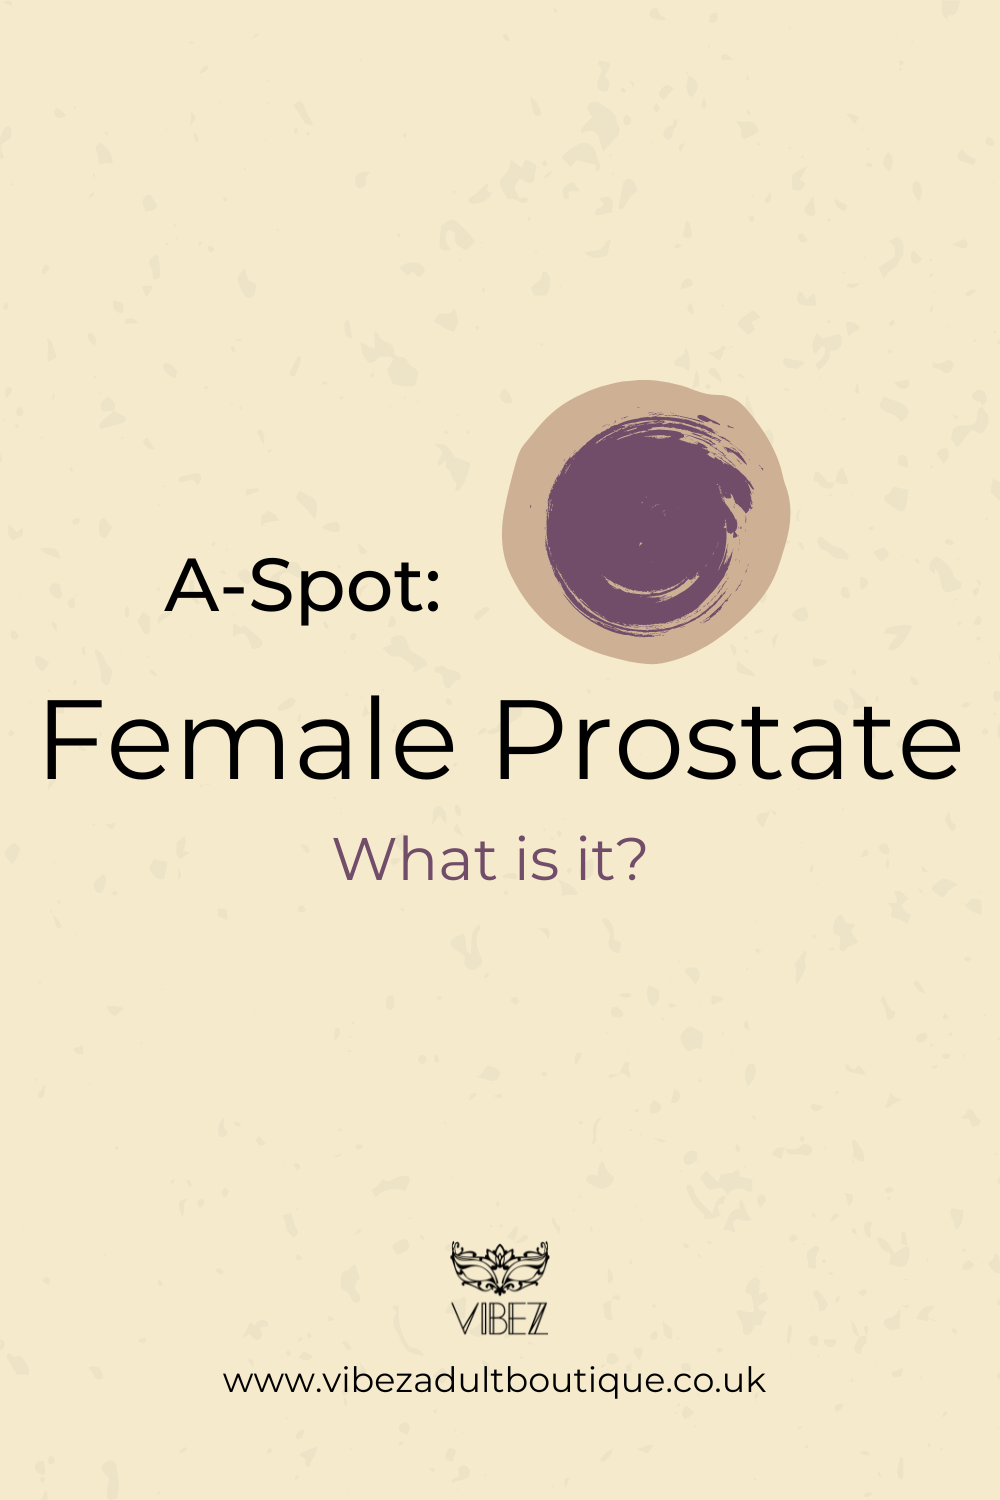 A-Spot: The Female Prostate, What Is It?